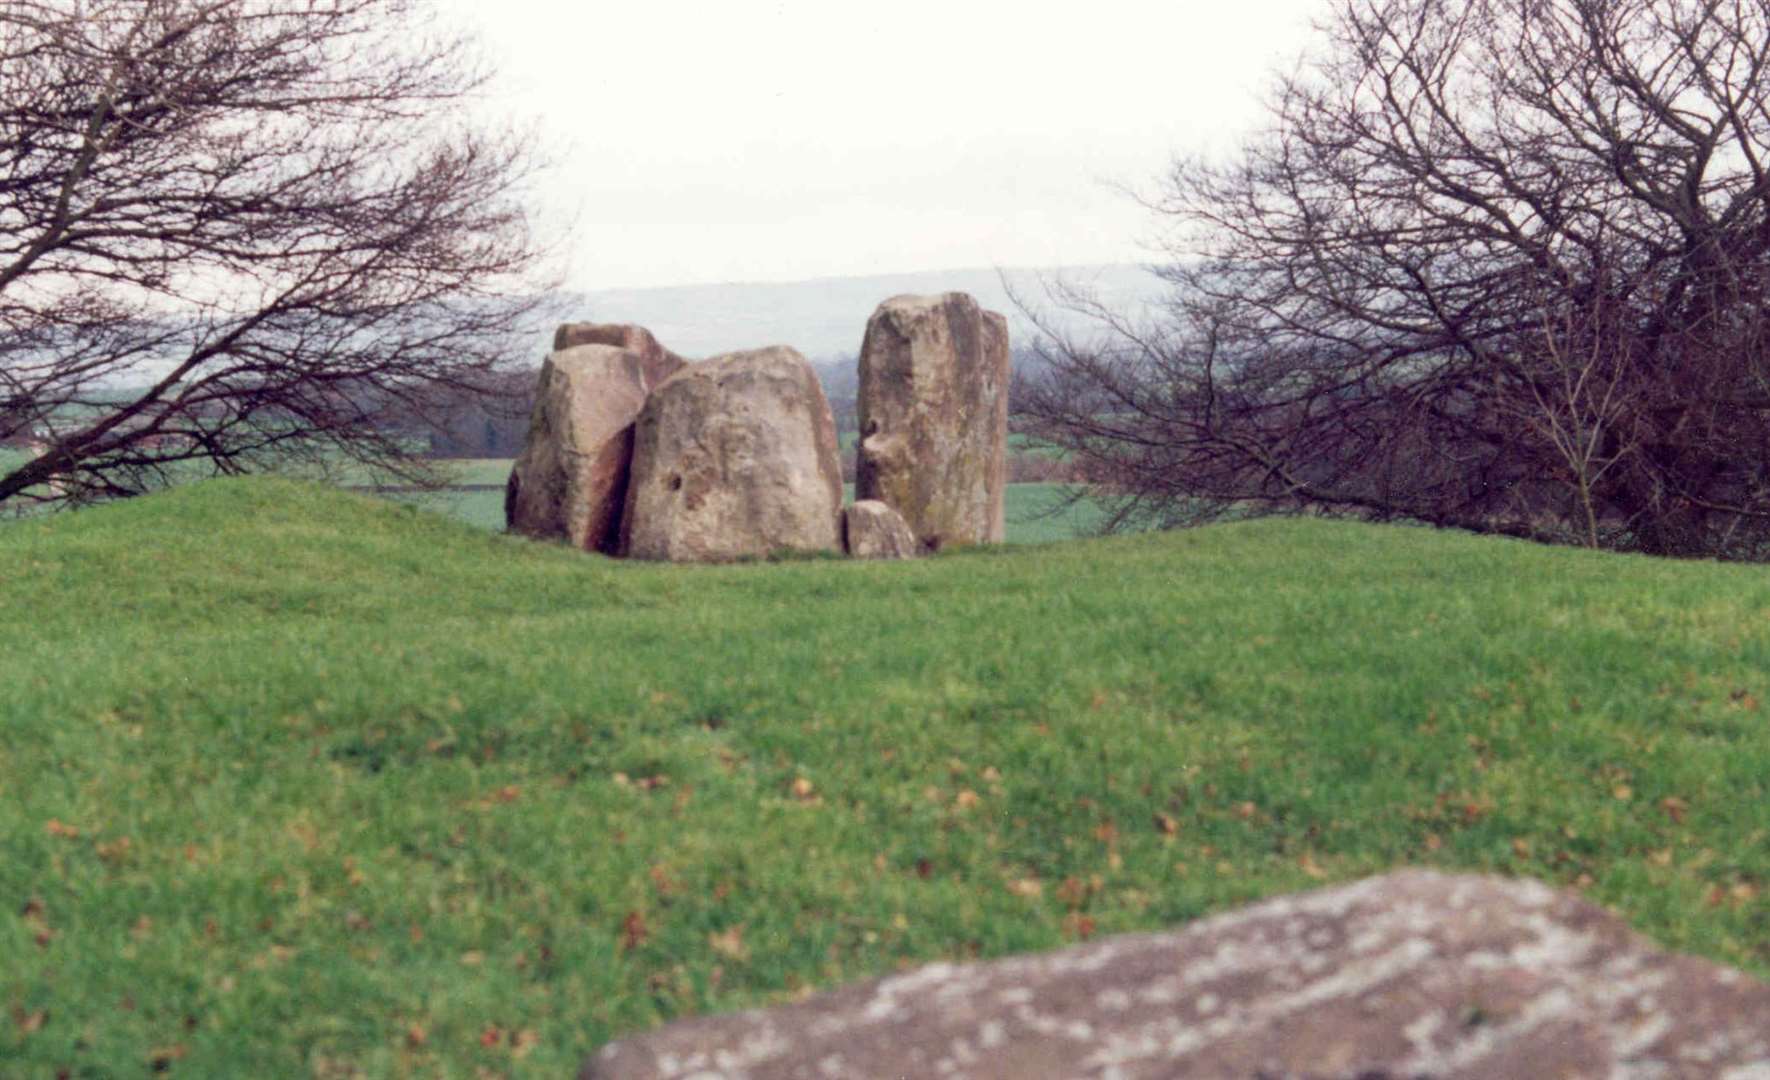 The Coldrum Stones stand in the shadow of the North Downs, near Trottiscliffe, and are looked after by the National Trust